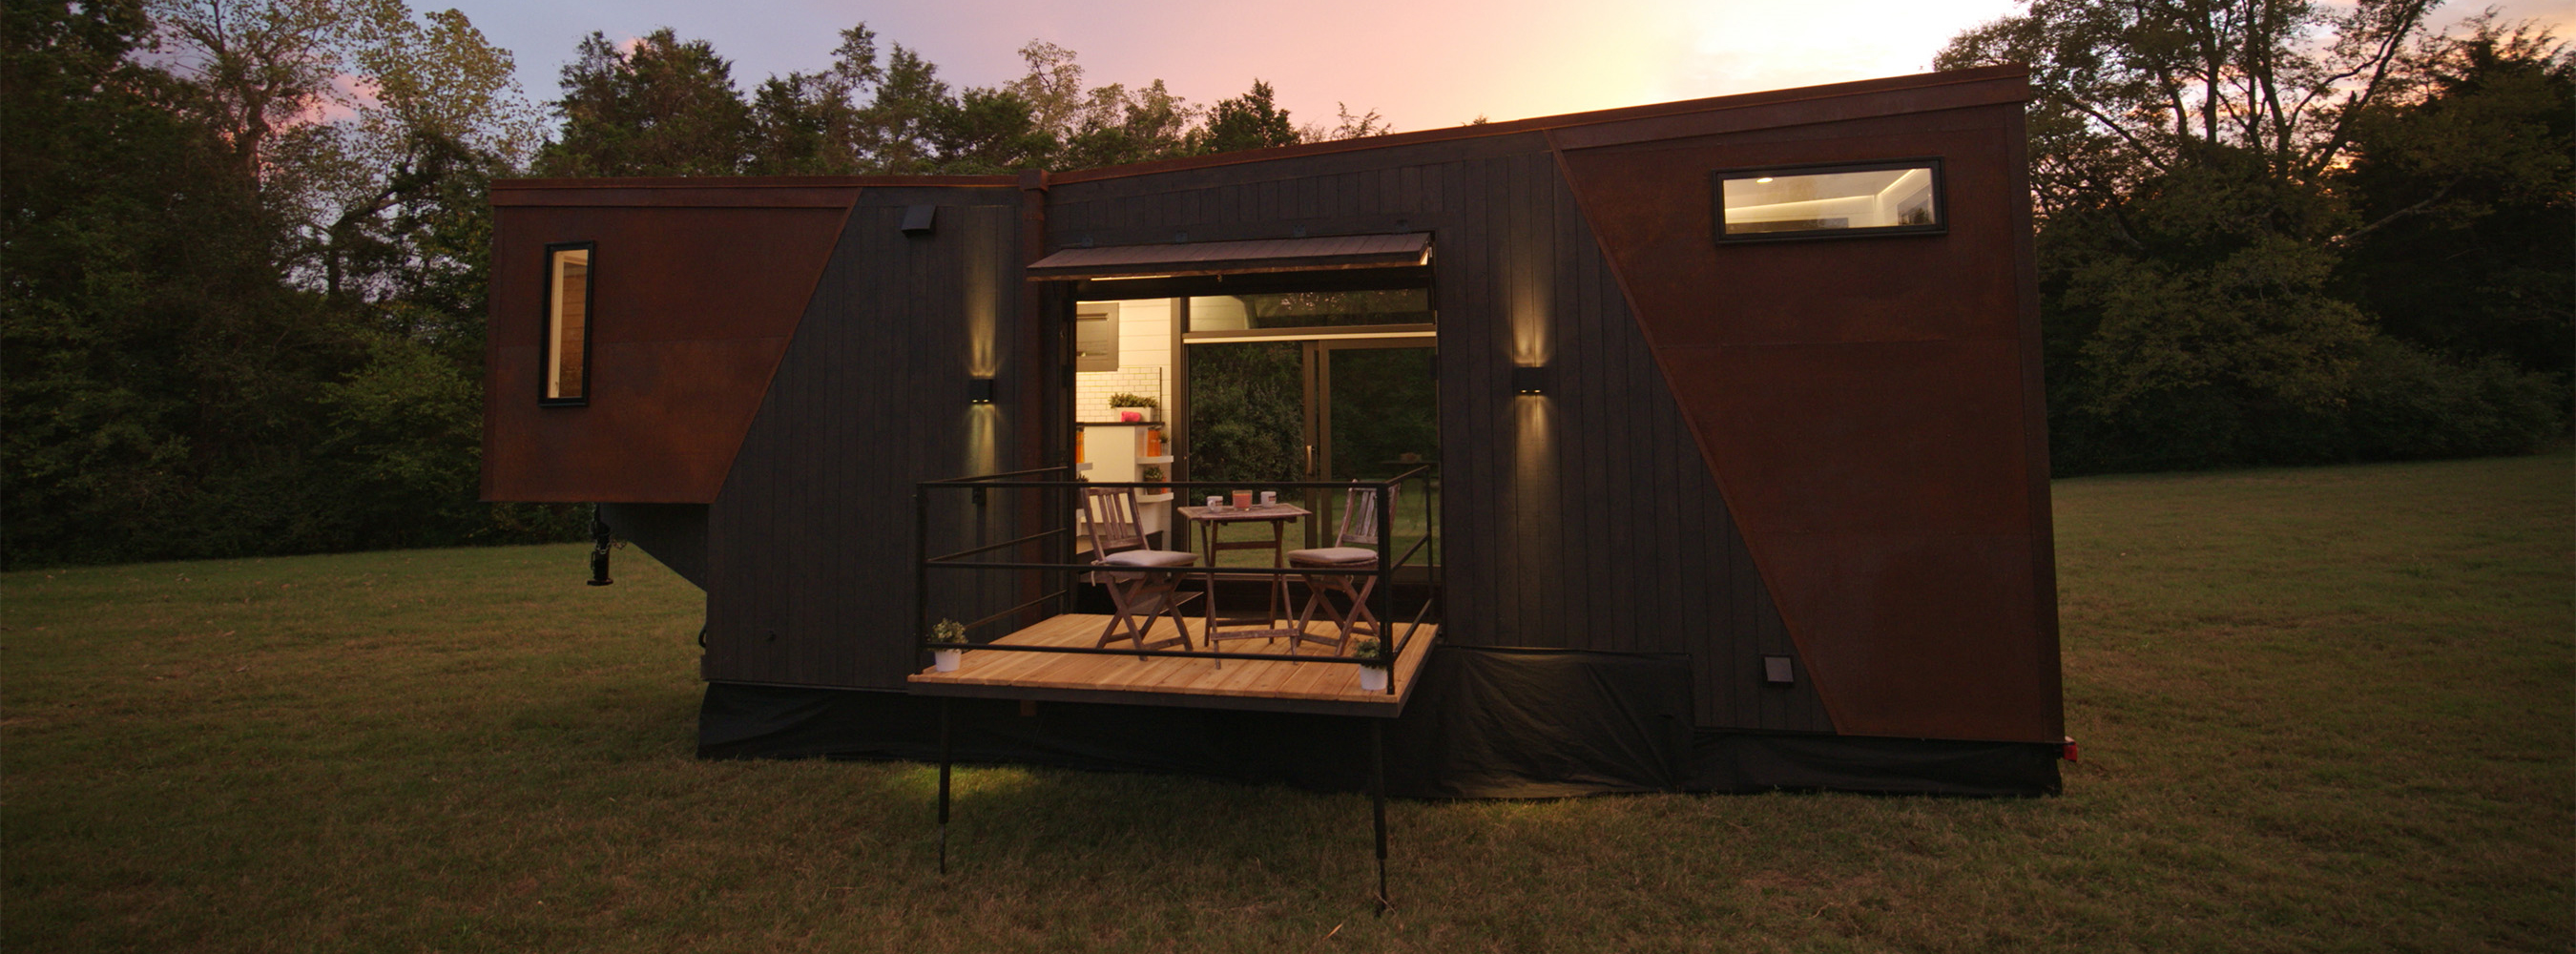 Image of a tiny house with a very modern aesthetic, located in a green field surrounded by trees.